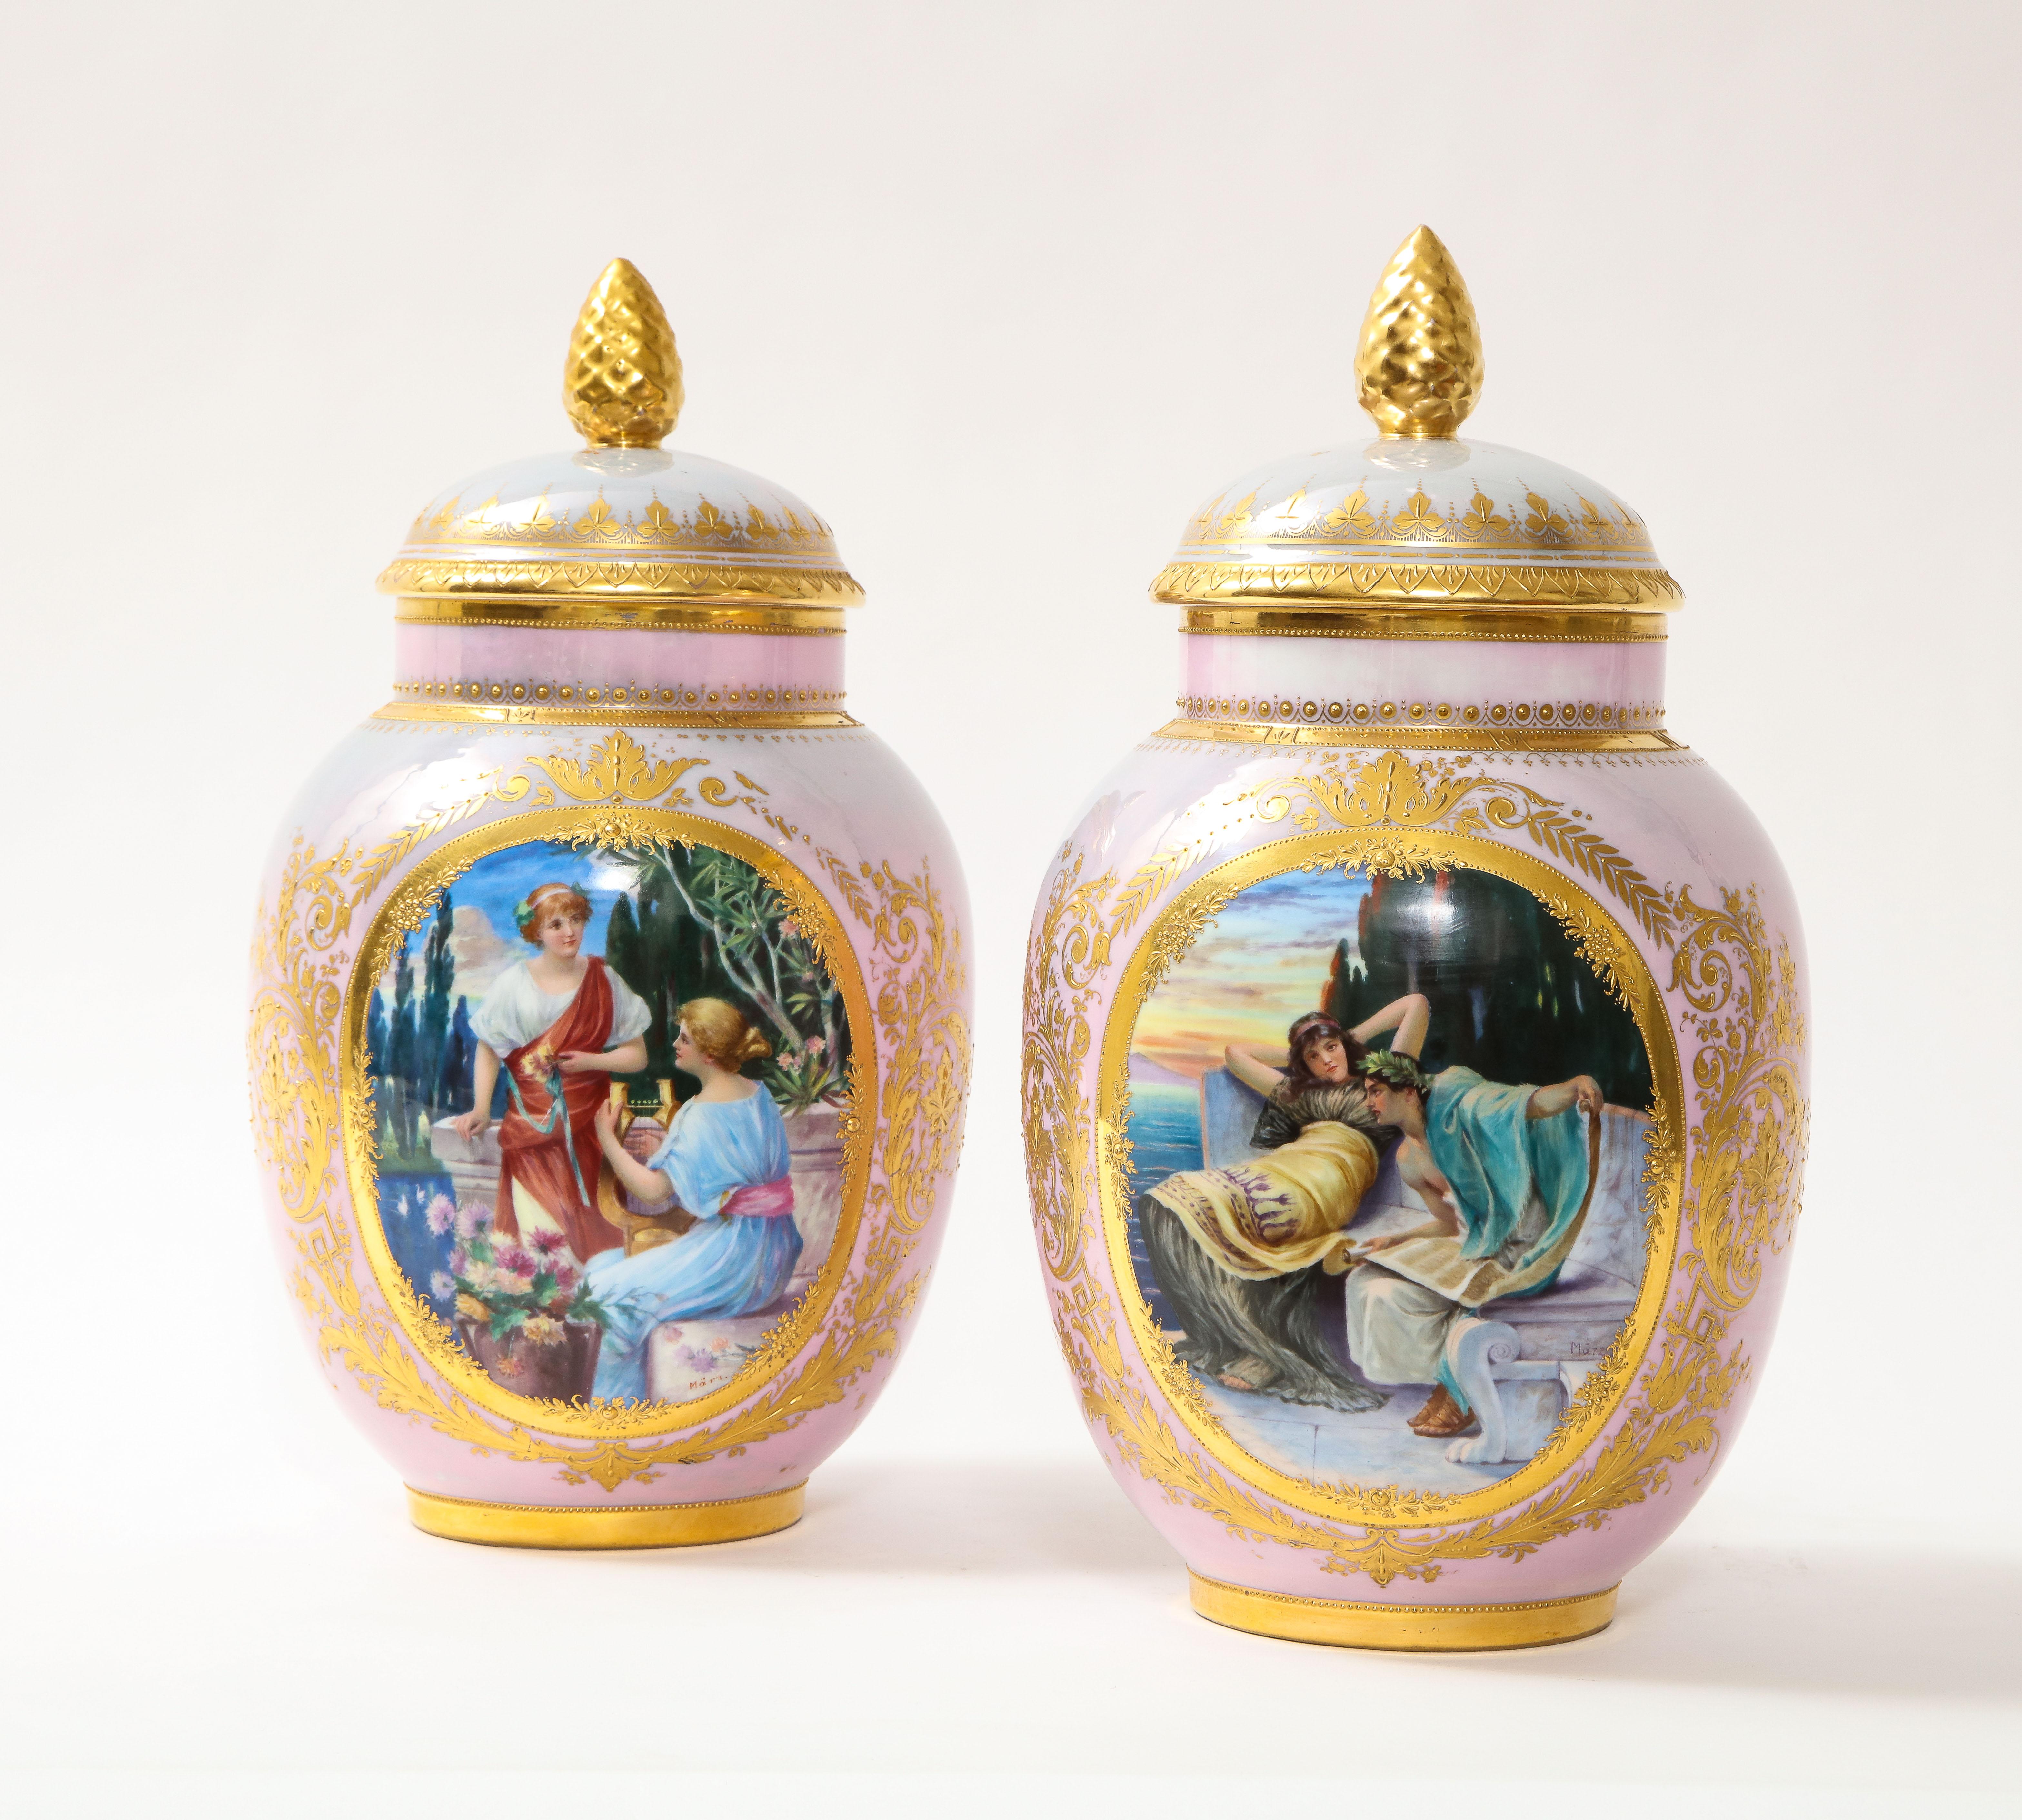 Gilt Pair of Royal Vienna Porcelain Iridescent Pink Vases with Neoclassical Scenes For Sale